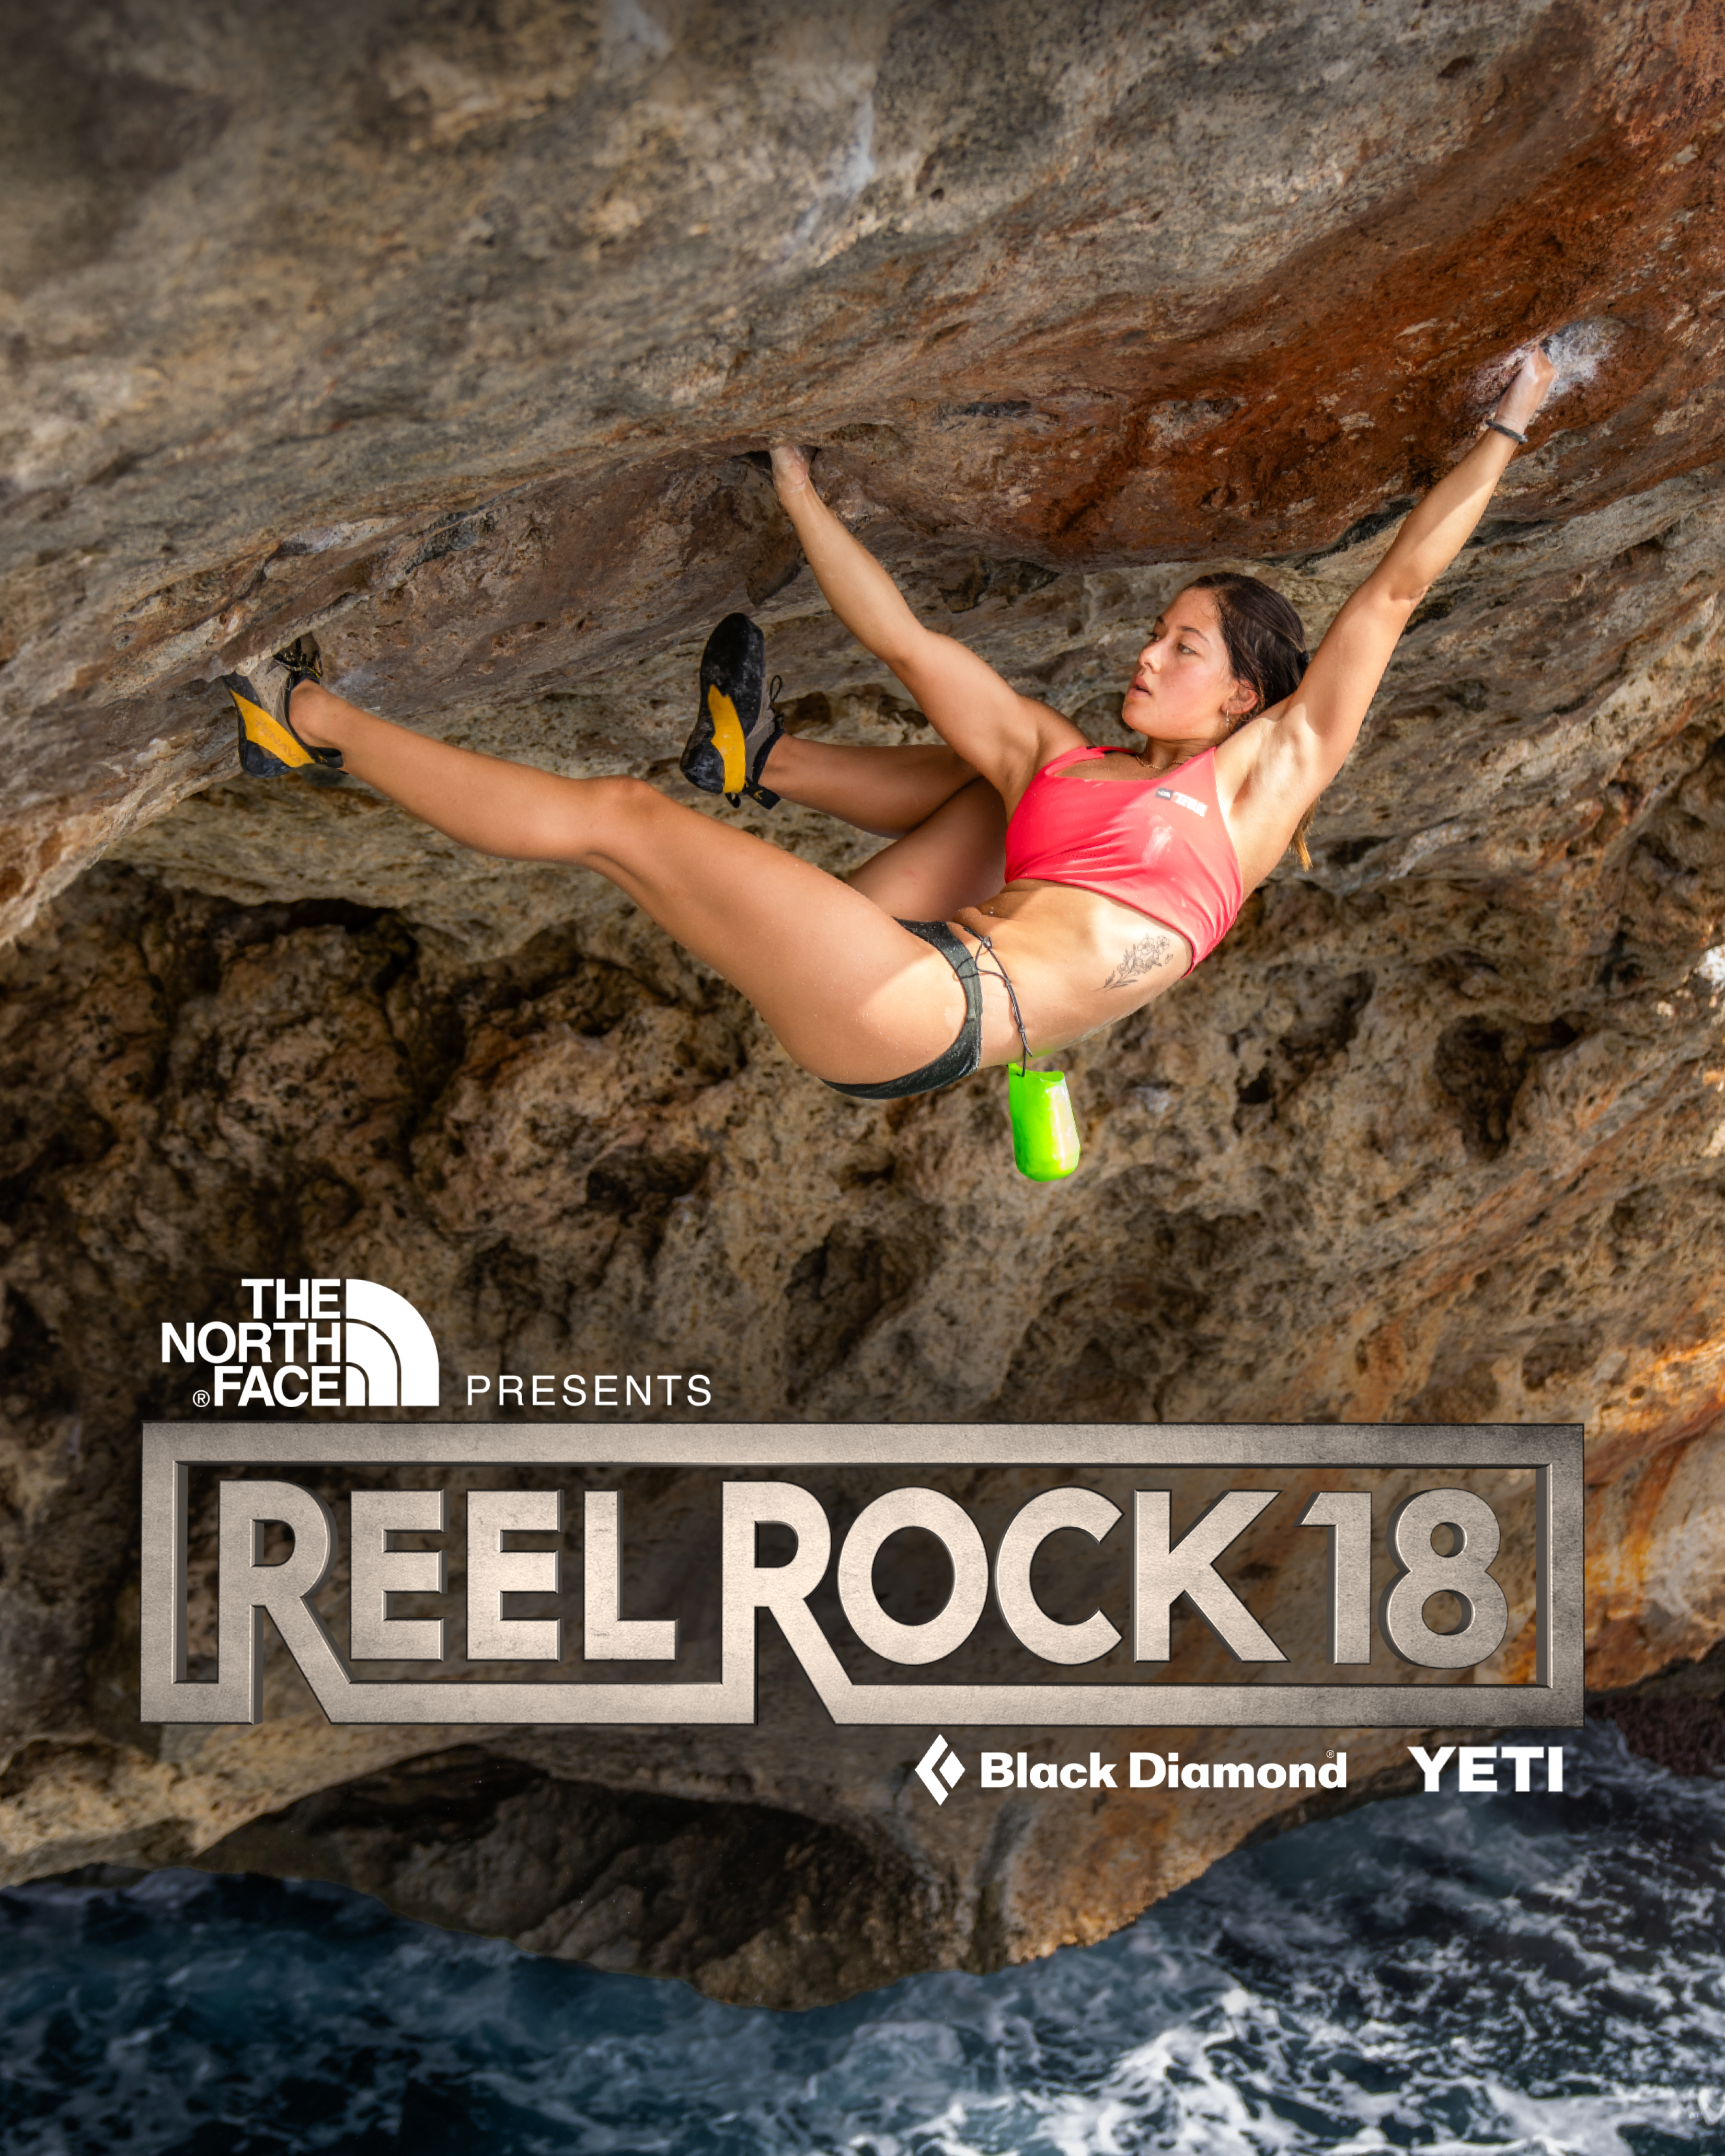 REEL ROCK Climbing Film Tour comes to I.V. Theater - The Santa Barbara  Independent